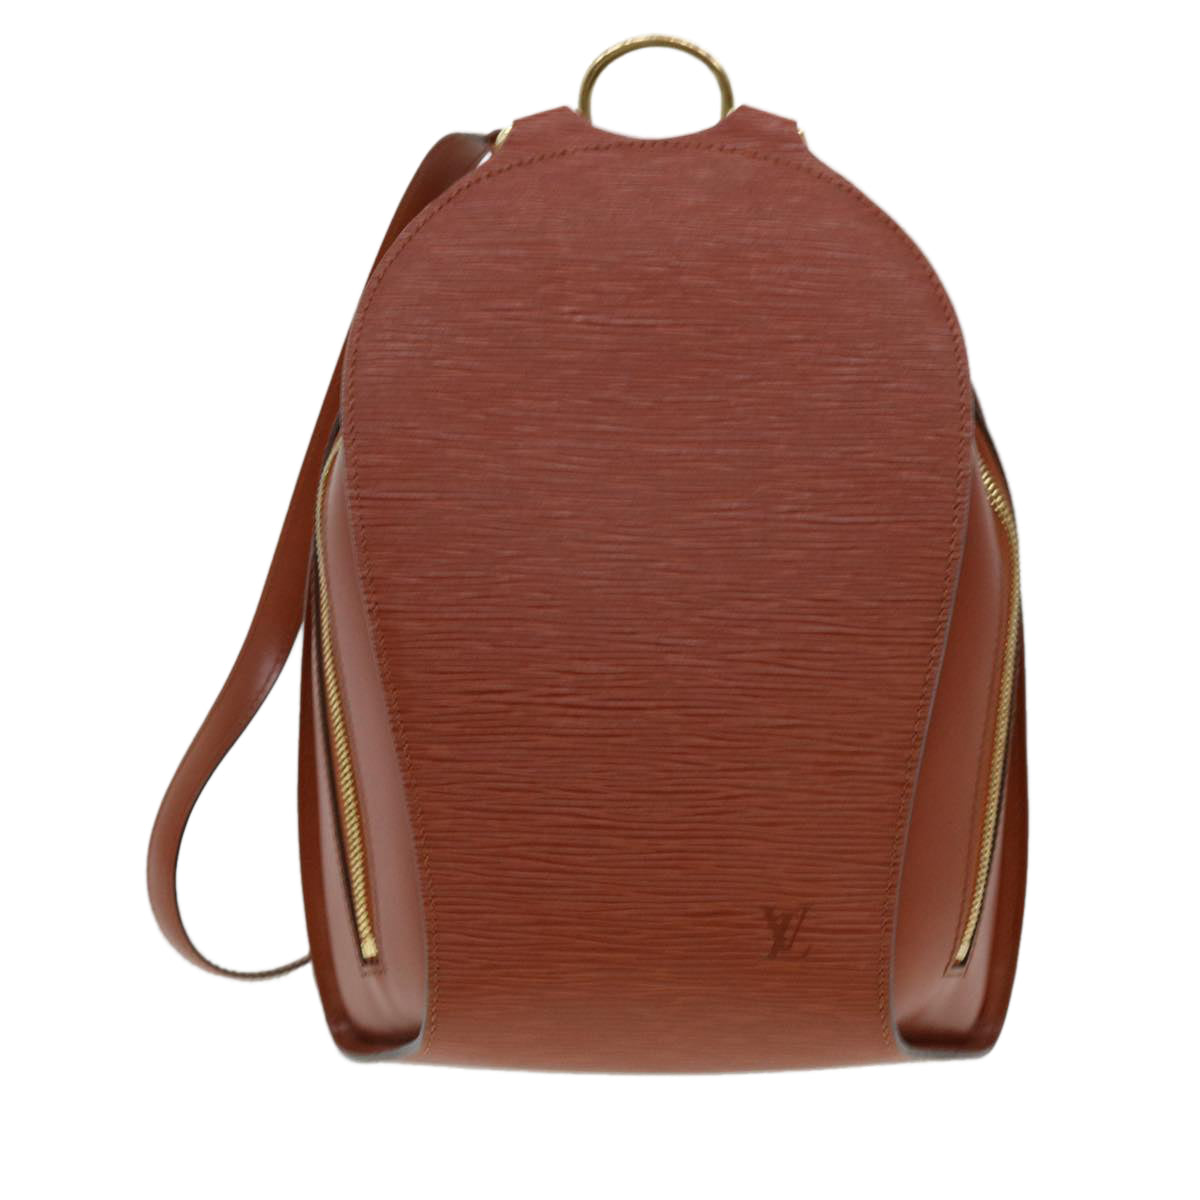 LOUIS VUITTON Epi Mabillon Backpack Brown M52233 LV Auth th3453